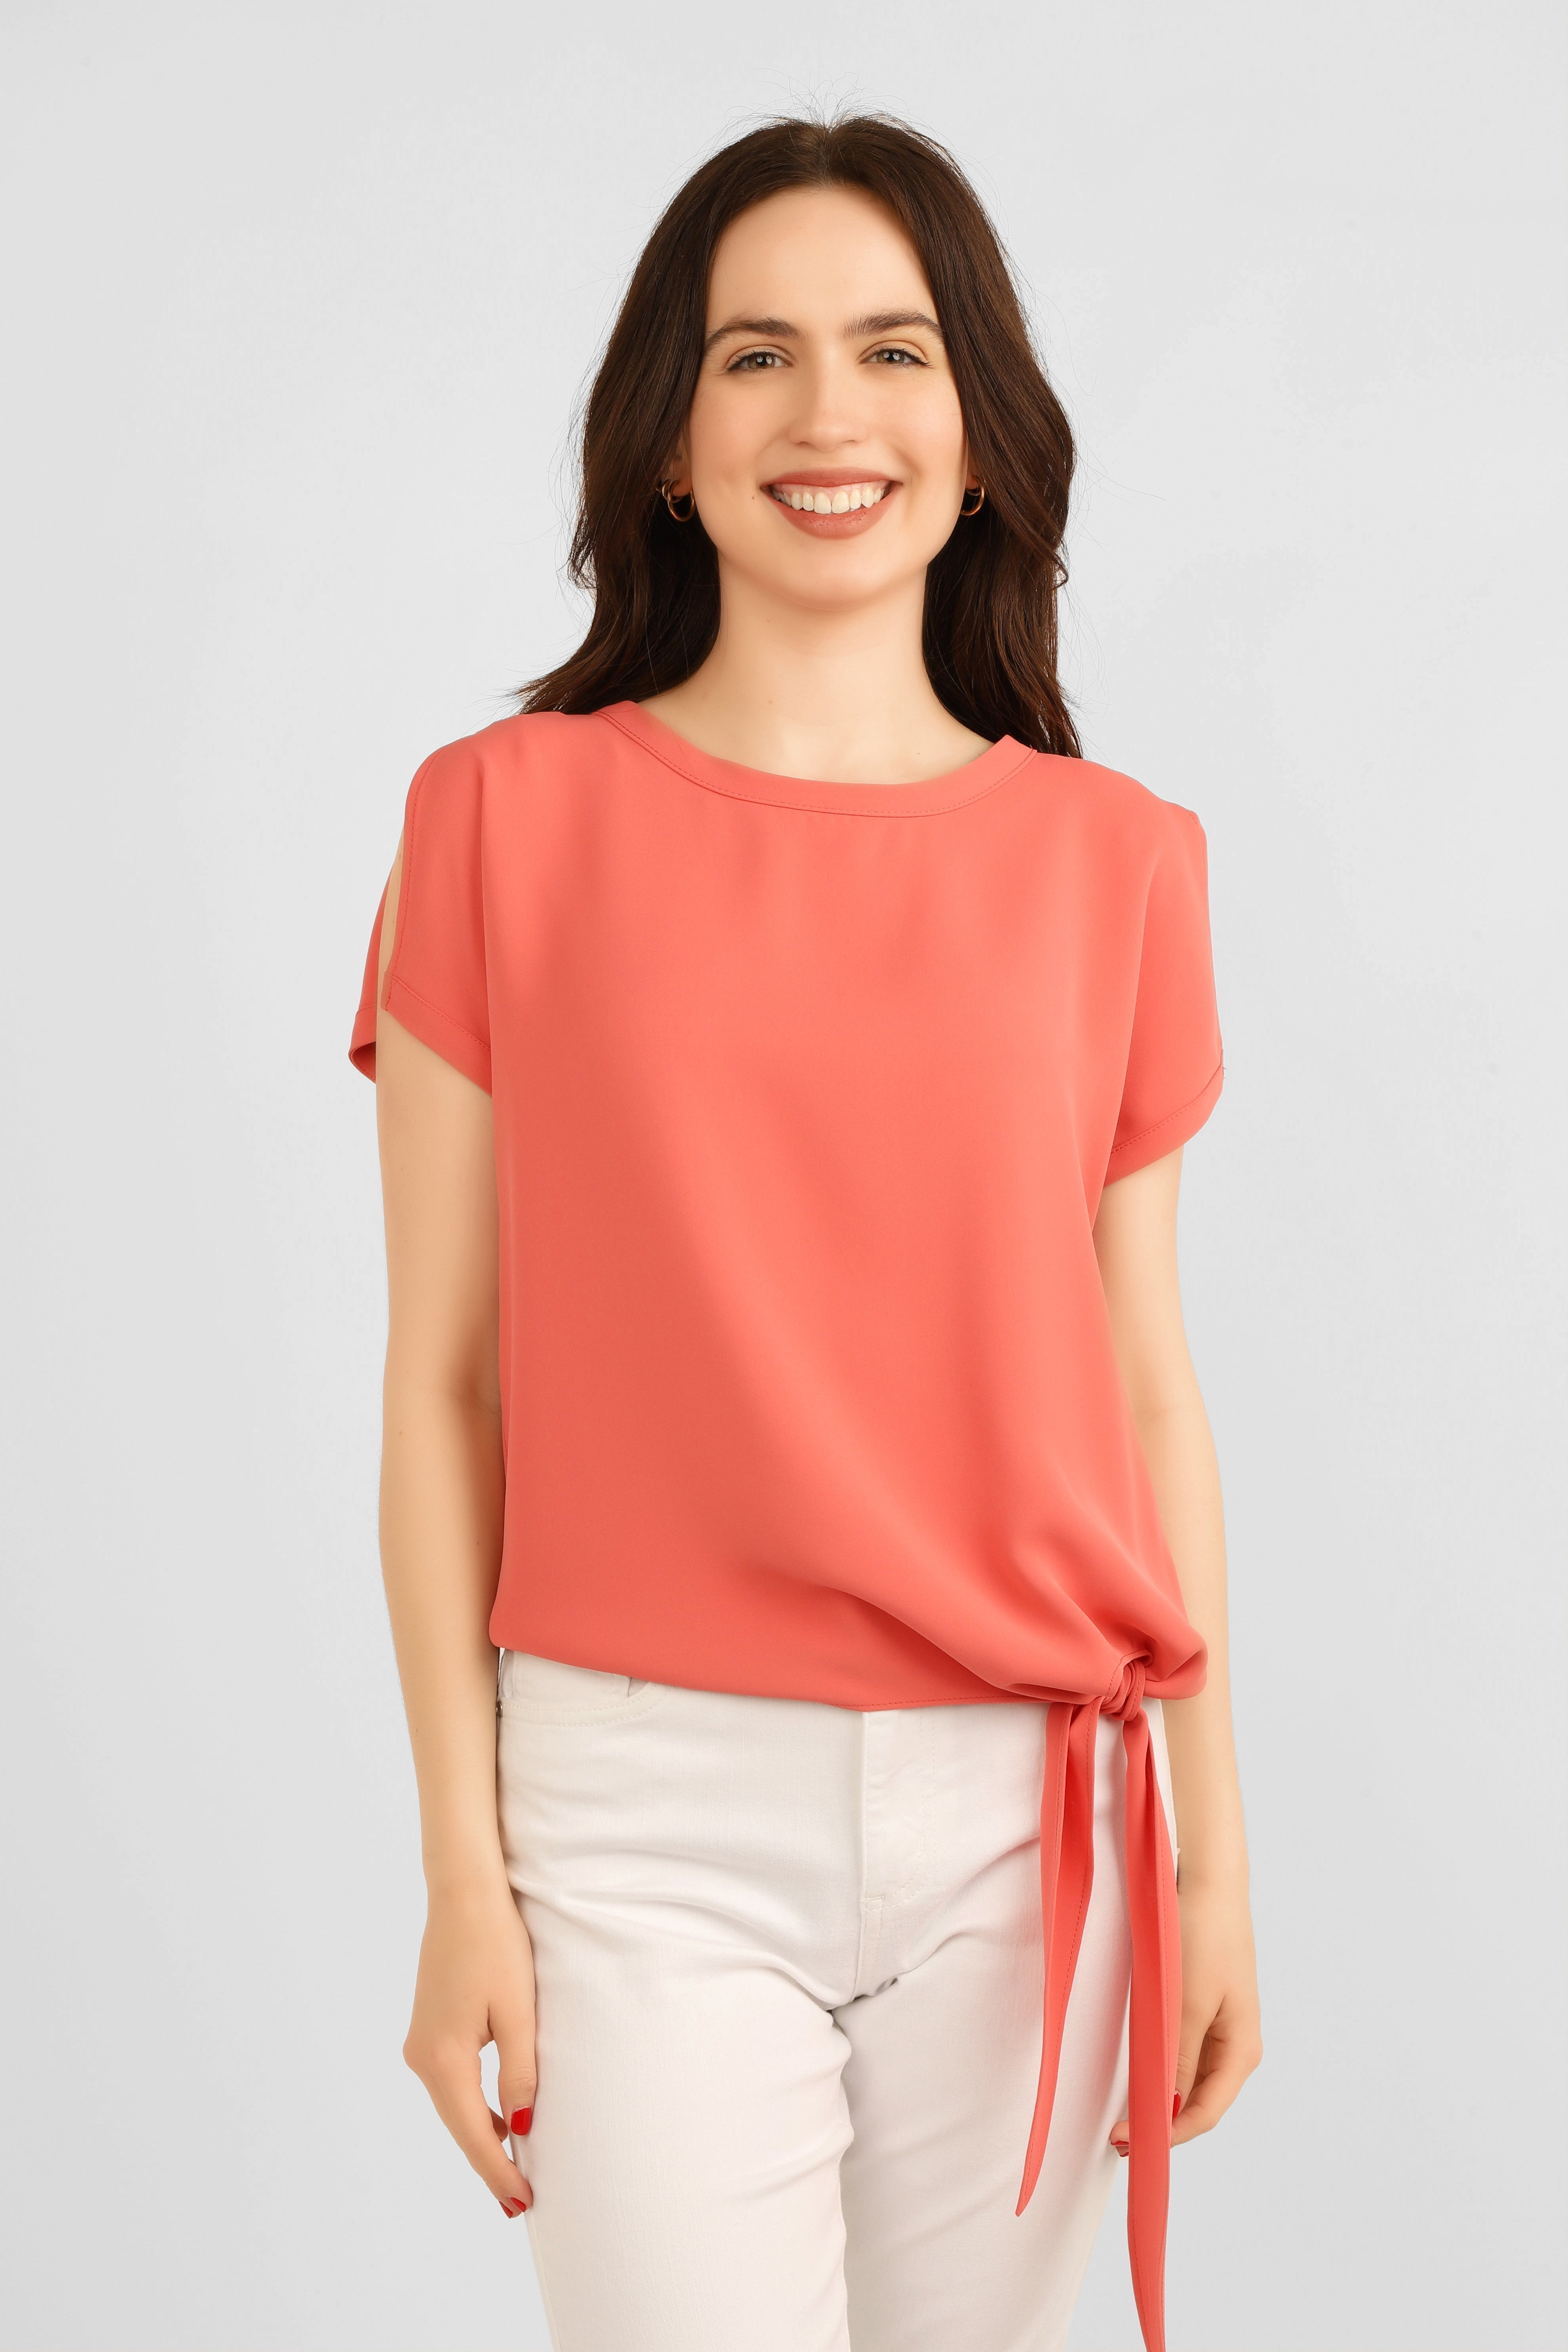 Women's Clothing FRANK LYMAN (181224) Short Sleeve Top with Side Tie in MELON